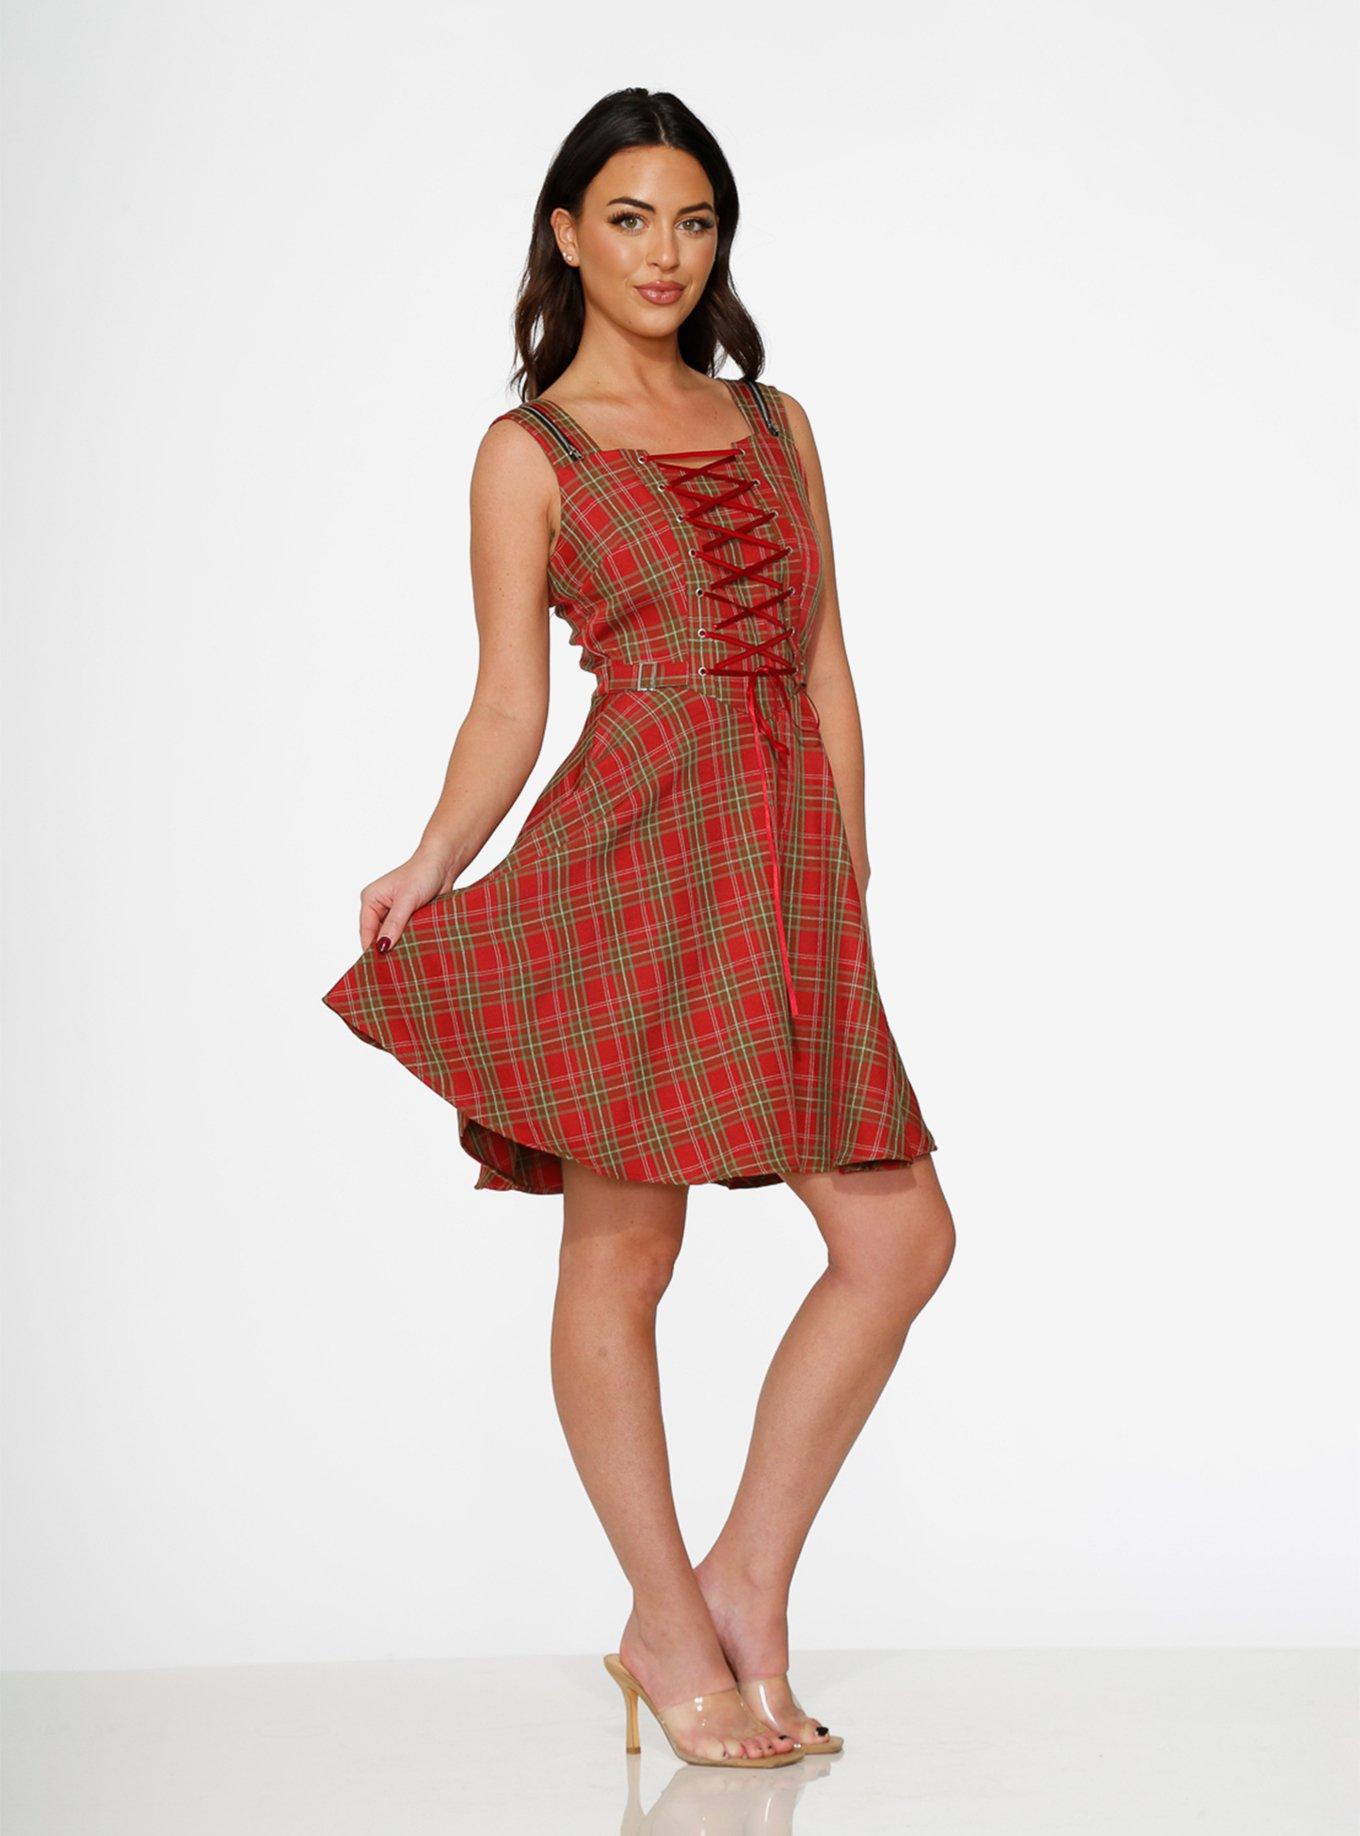 Red Plaid Swing Lace-Up Dress, PLAID - RED, alternate